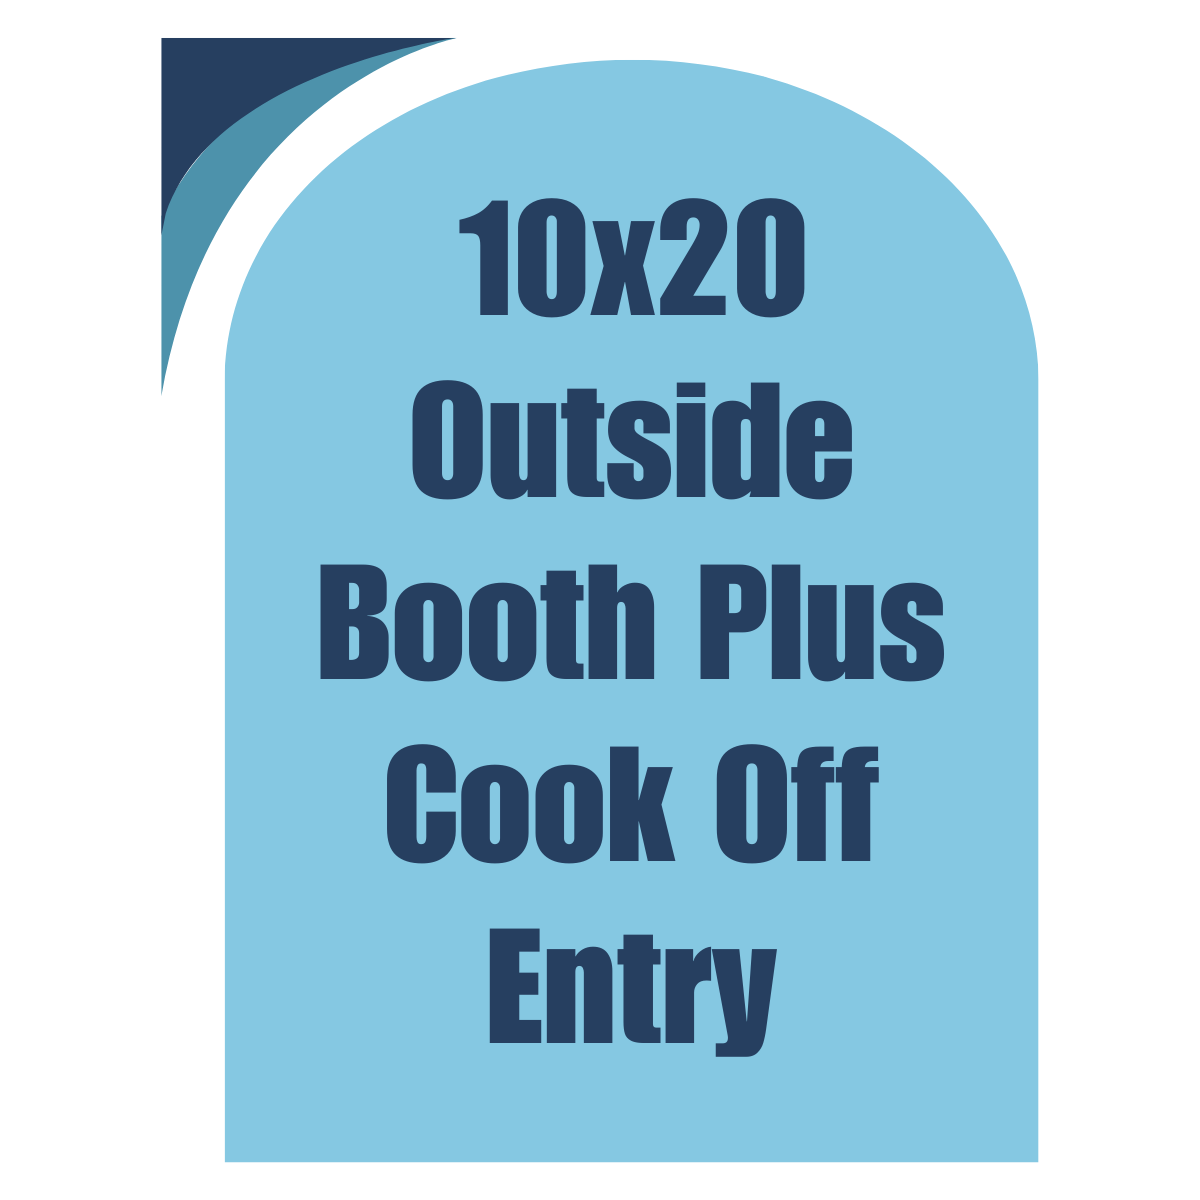 10x20 Outside Booth Plus Cook-Off Entry